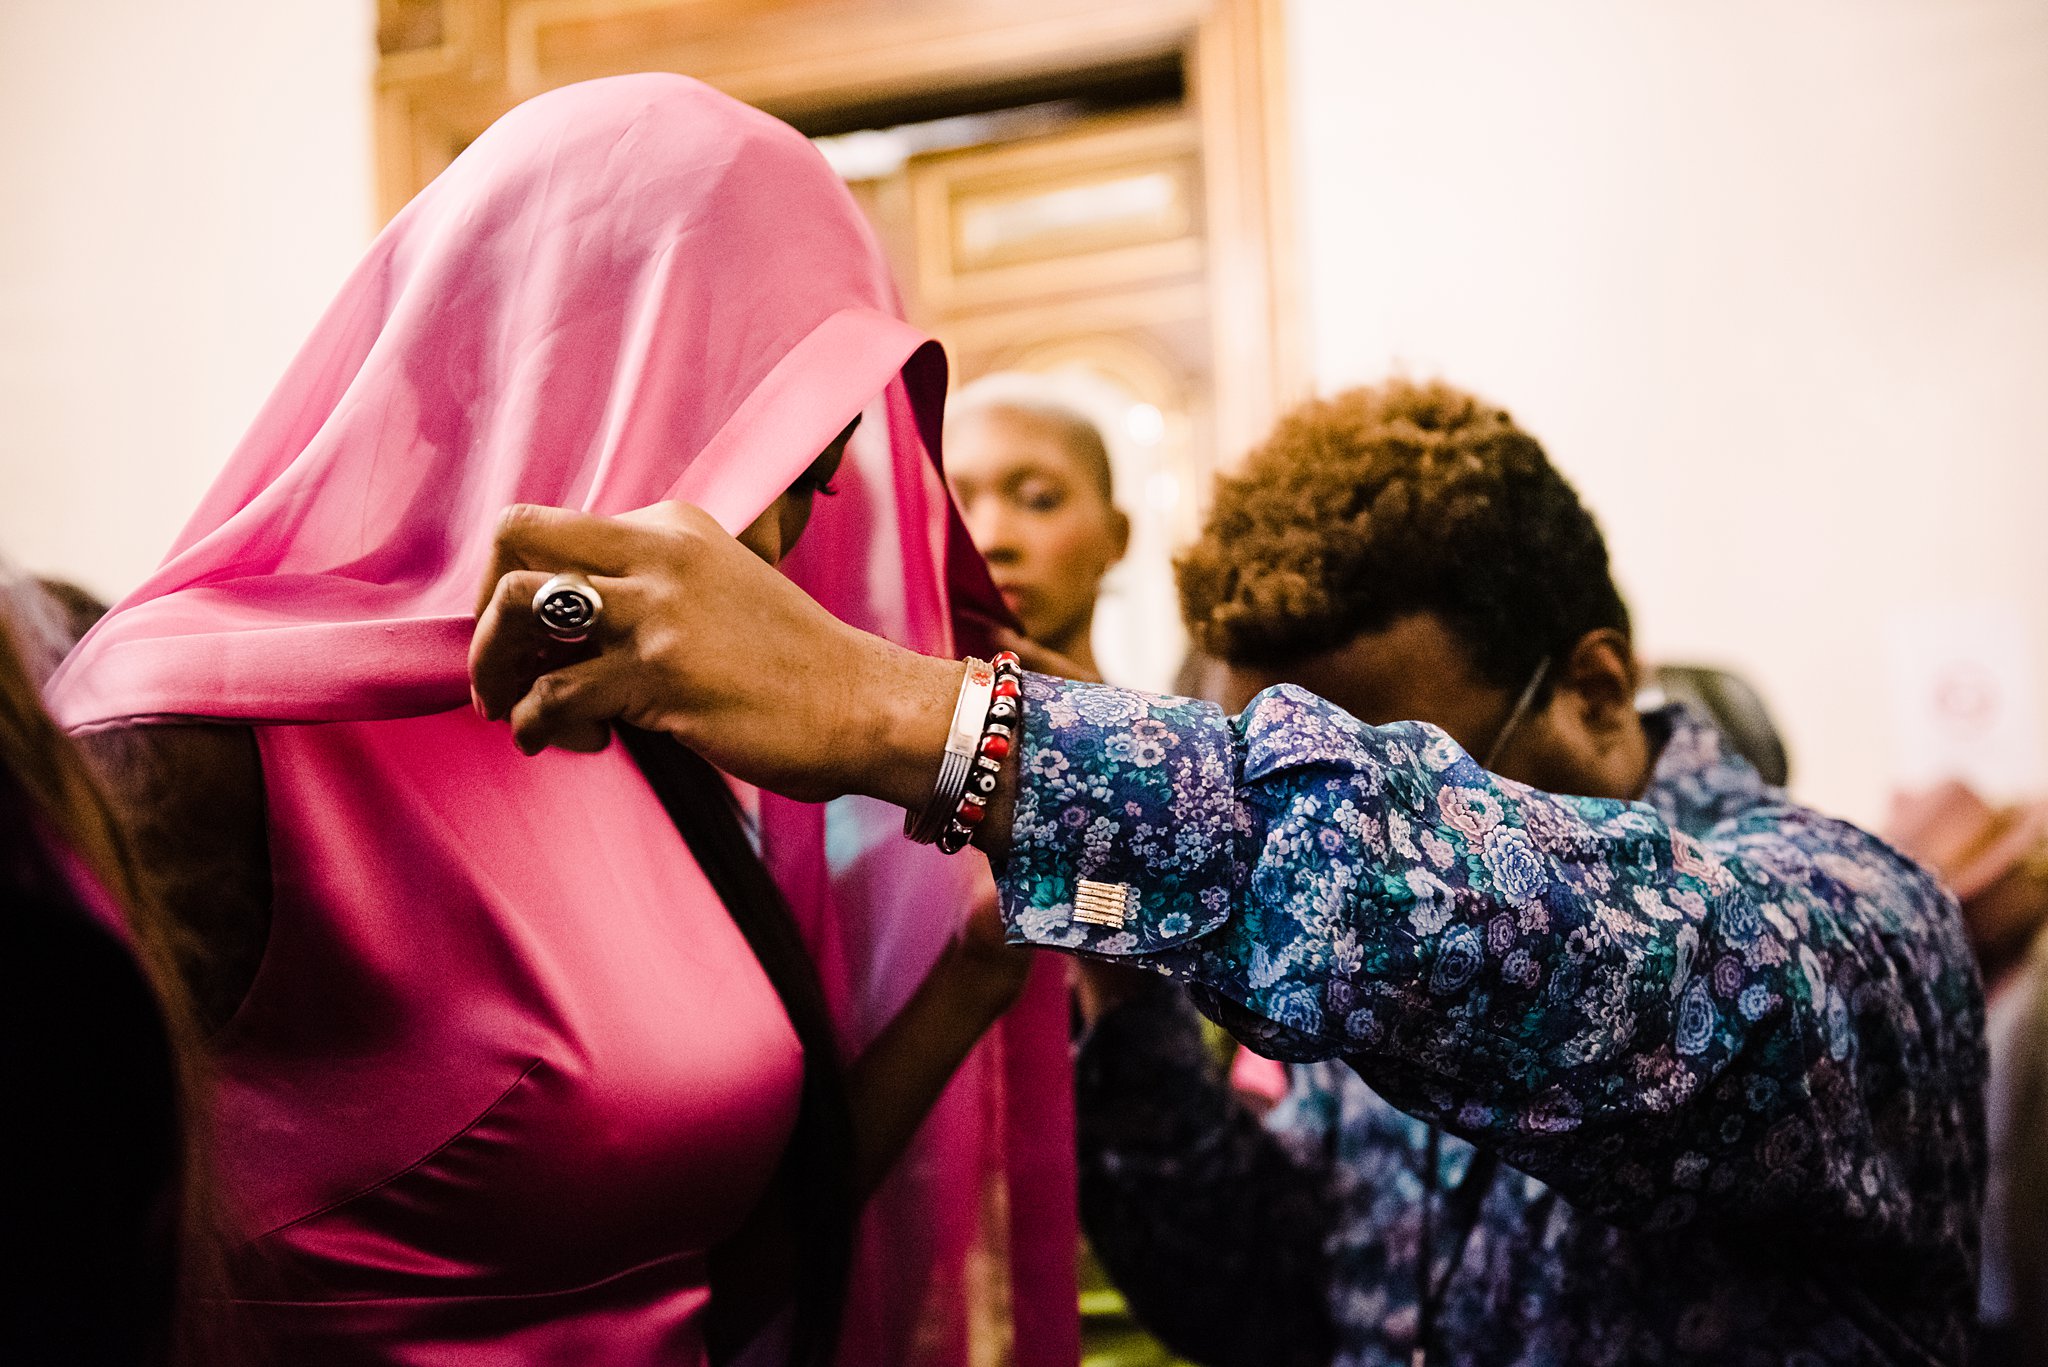 styling a pink hood on a model at paris fashion week, backstage at the flying solo show ss20